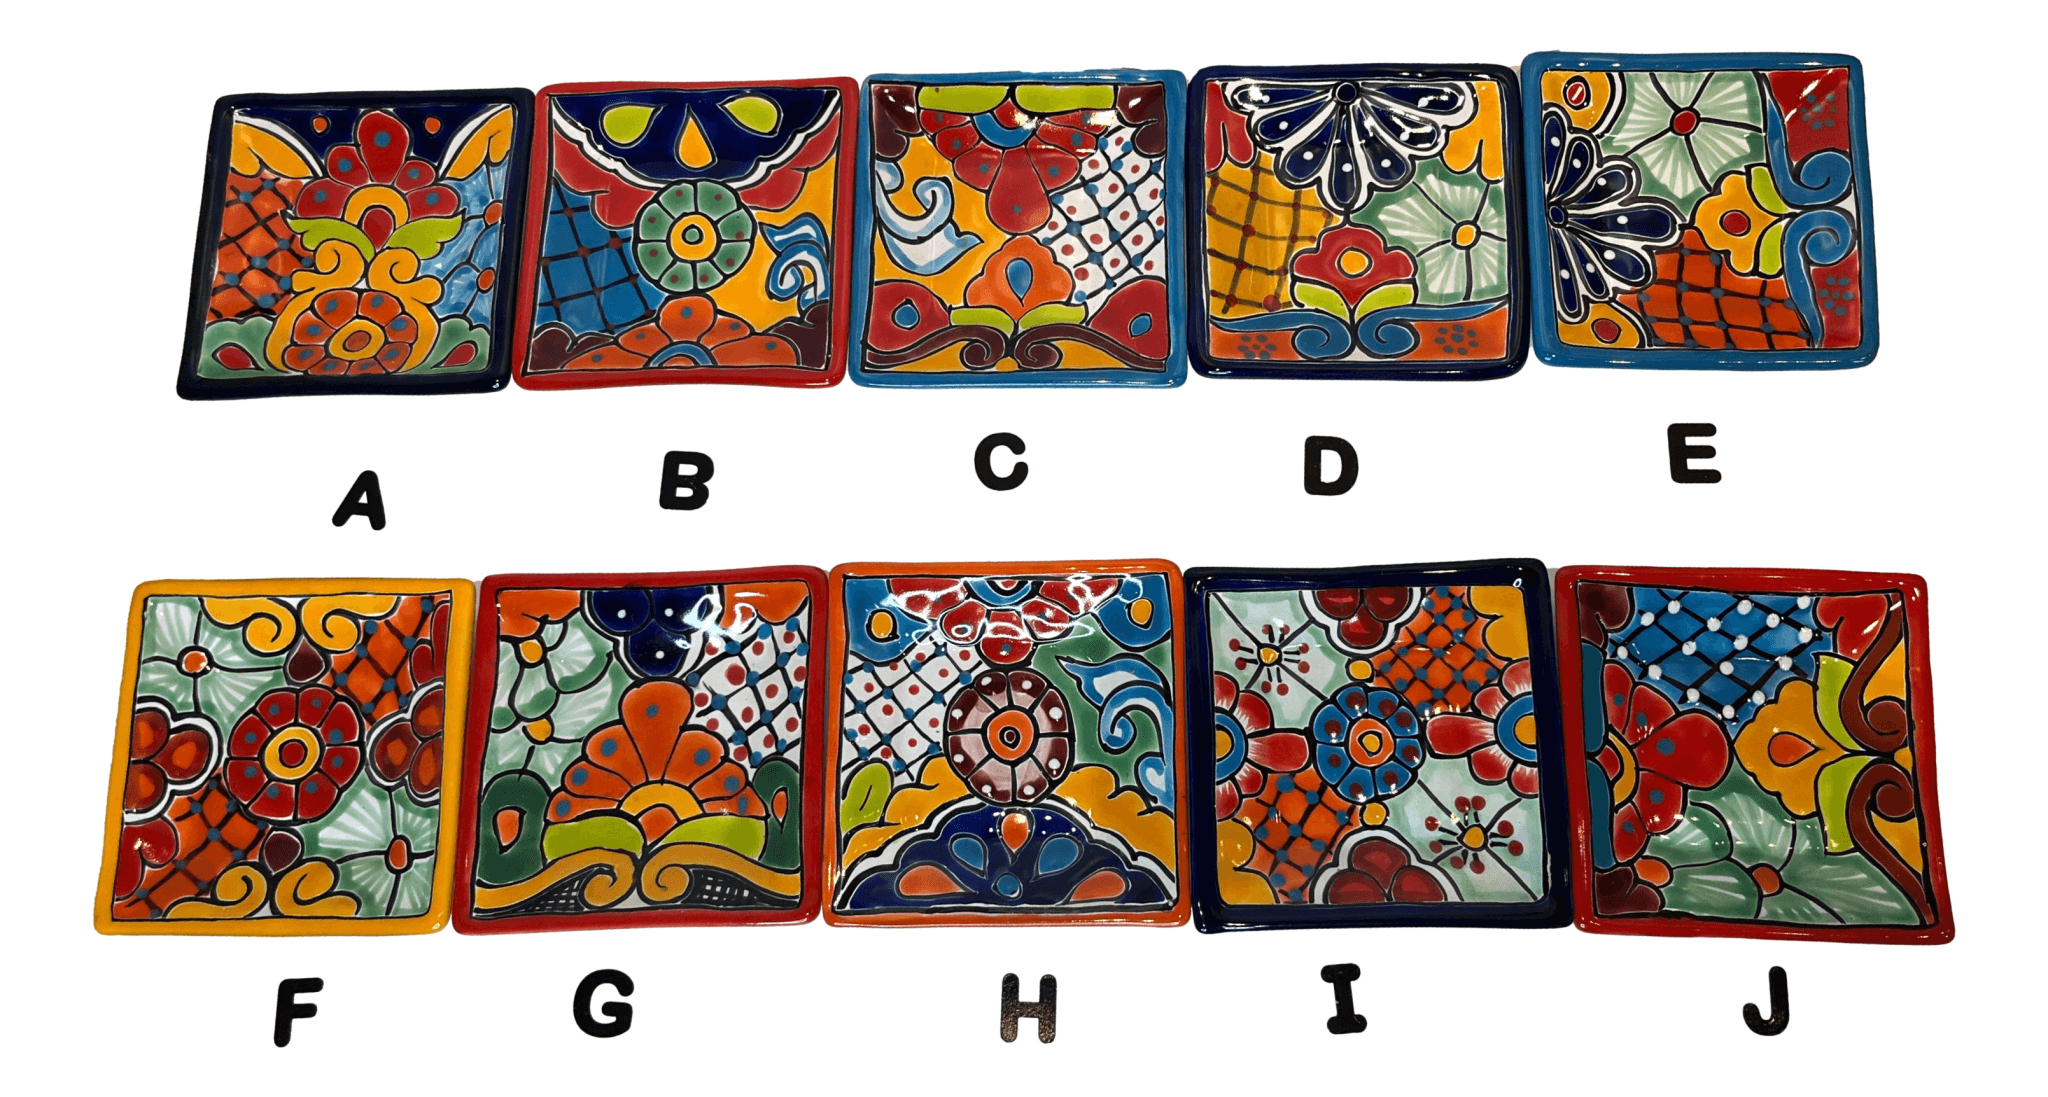 Talavera Dishware Square Plates Handcrafted By Skilled Mexican Artisans L: 5 inches X W: 5 inches - Ysleta Mission Gift Shop- VOTED 2022 El Paso's Best Gift Shop